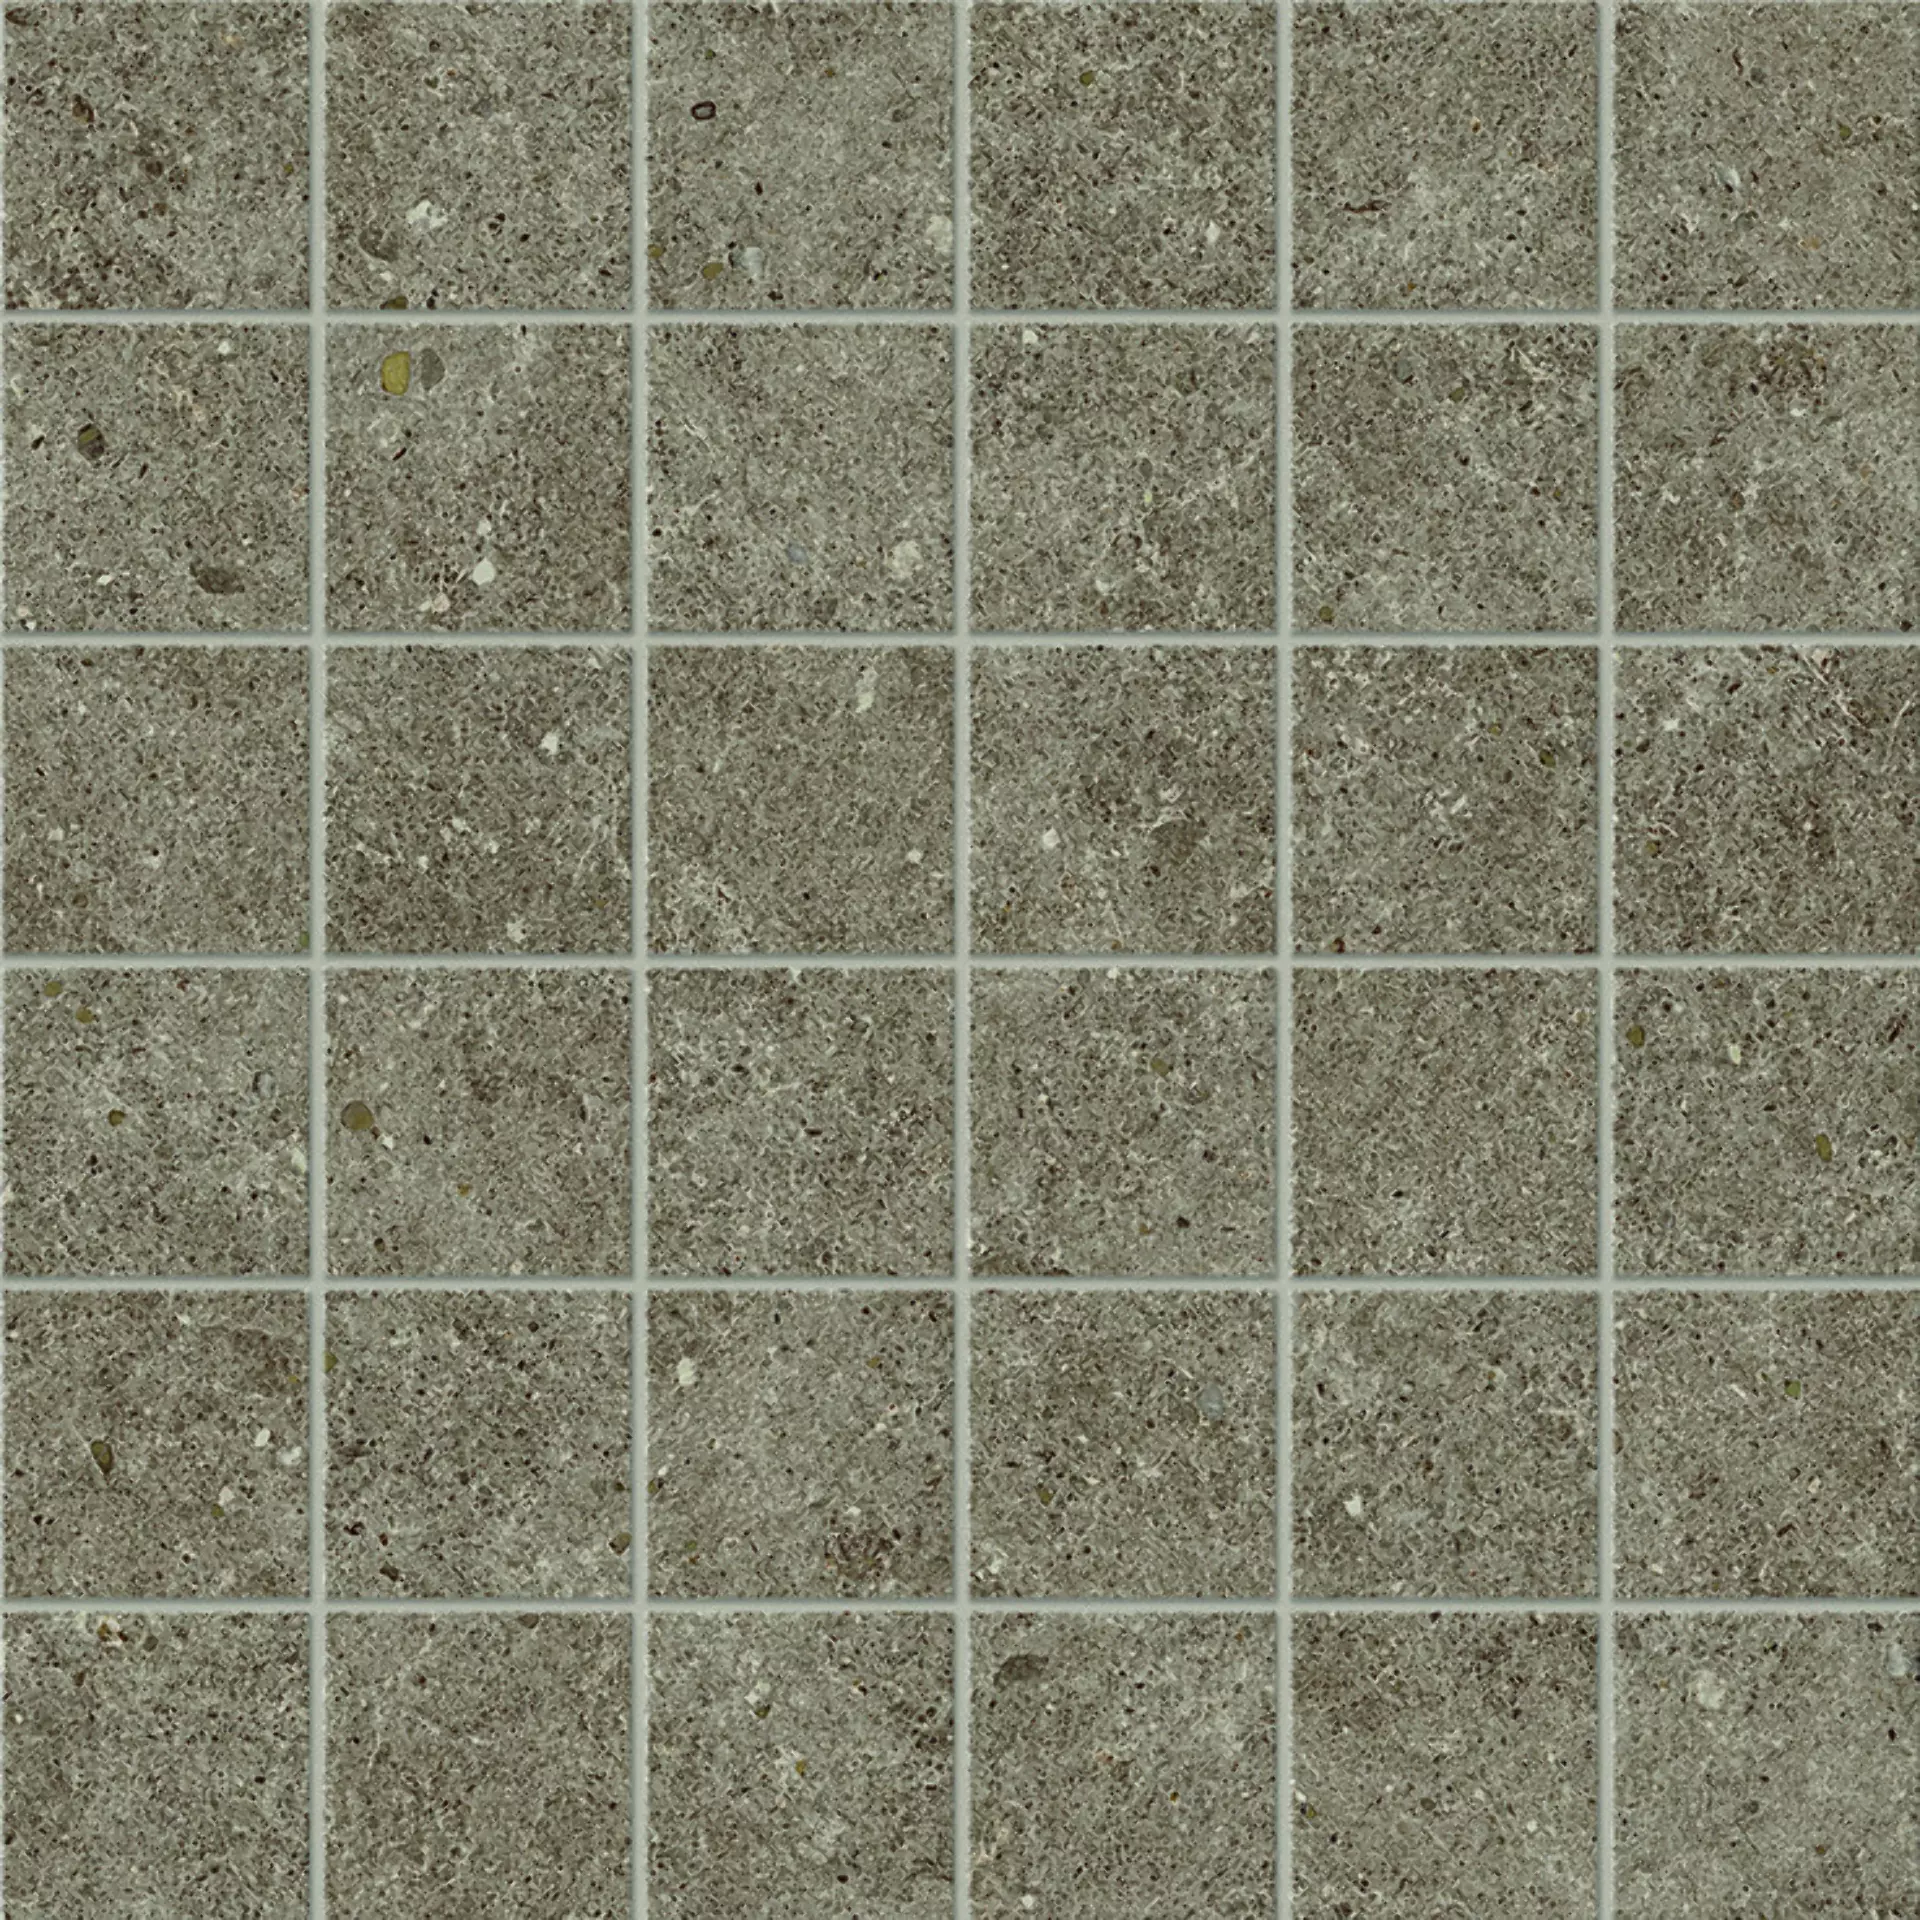 Atlasconcorde Boost Stone Taupe Matt Mosaic A7DH 30x30cm rectified